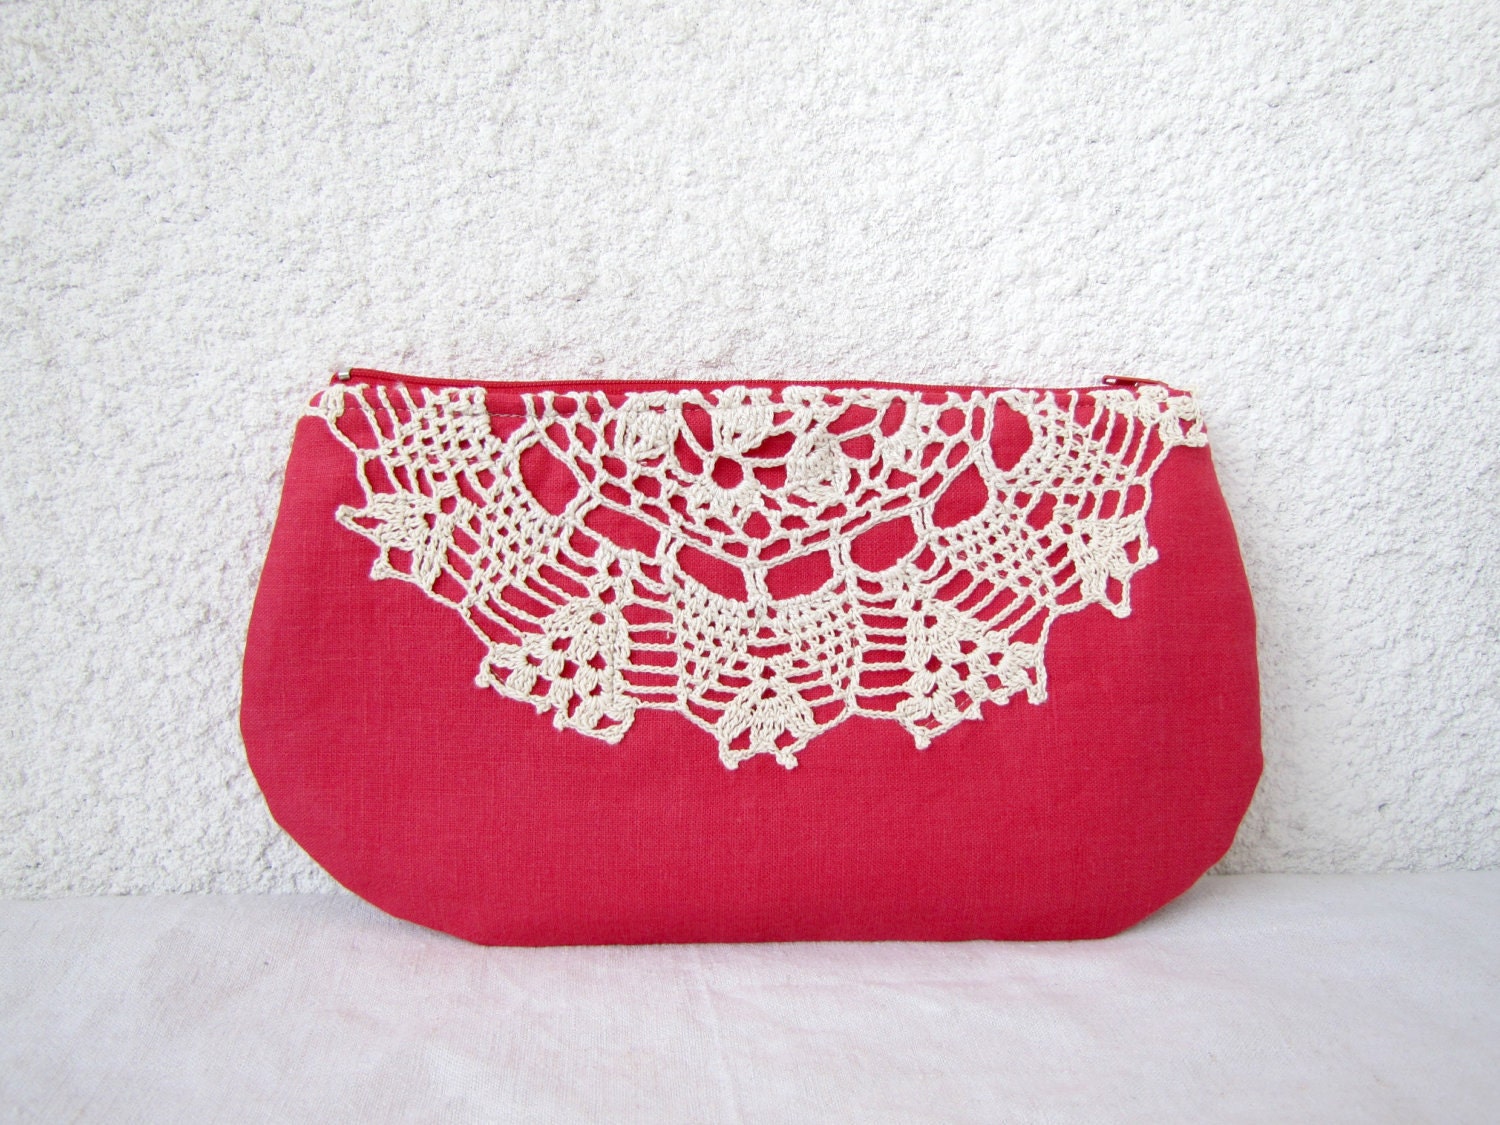 Raspberry and cream - Linen and Vintage Doily Clutch